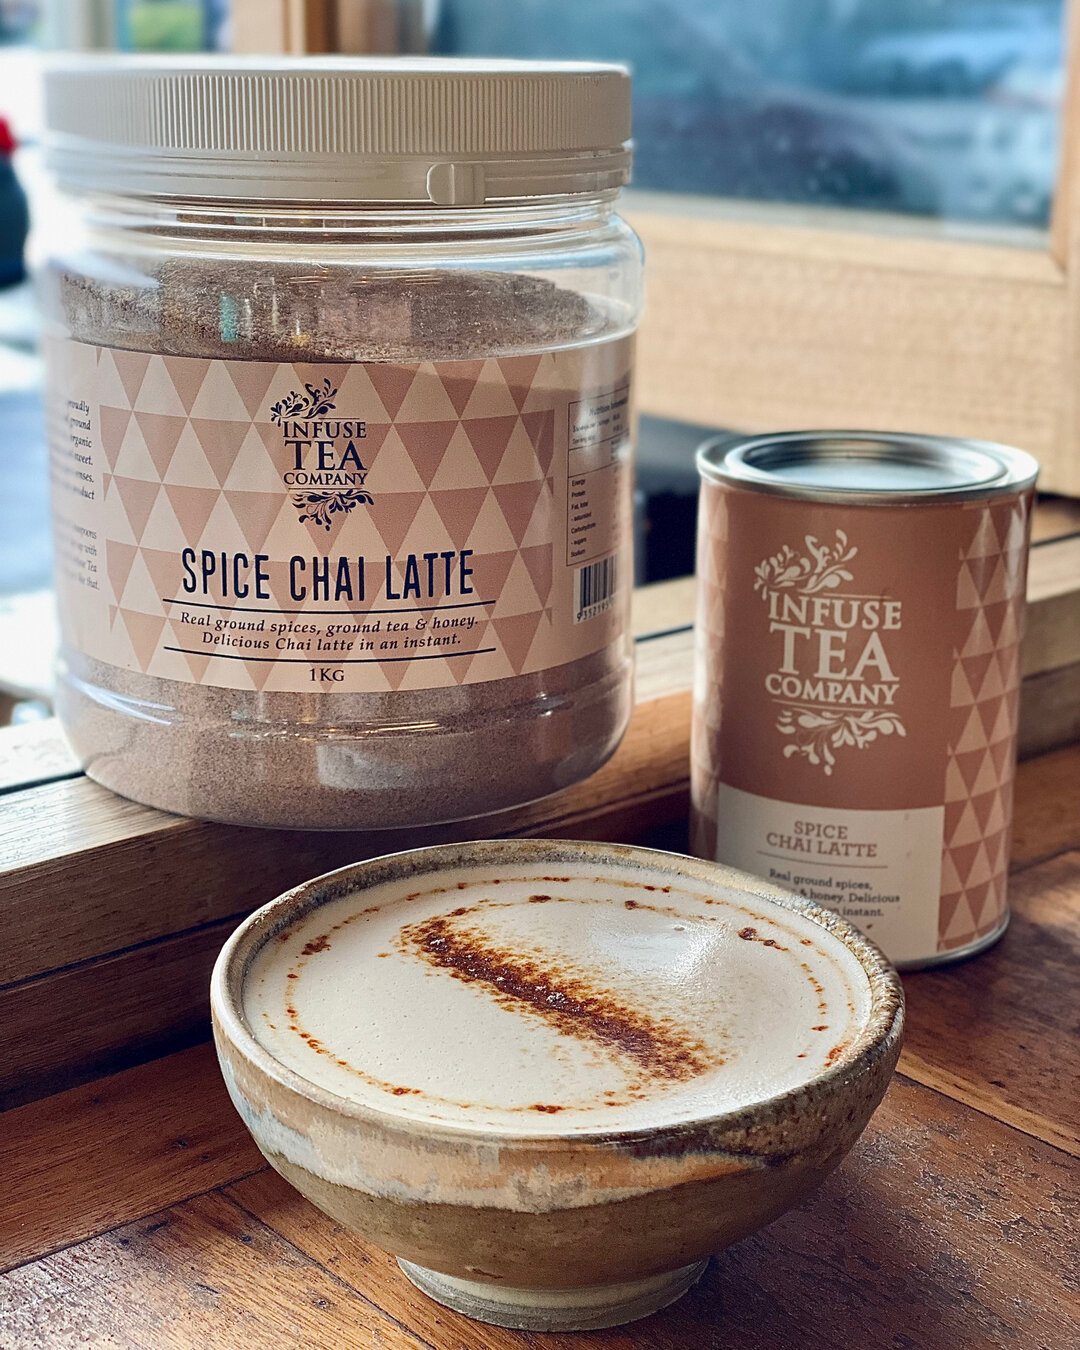 Warming up with our new spiced chai latte from @infuseteaco! It&rsquo;s creamy, spicy, sweet and made in WA! ​​​​​​​​
​​​​​​​​
​​​​​​​​
​​​​​​​​
​​​​​​​​
#betterbread #bredco #bredbread #albany #sustainable #artisanbread #lovacore #sourdough #realbre